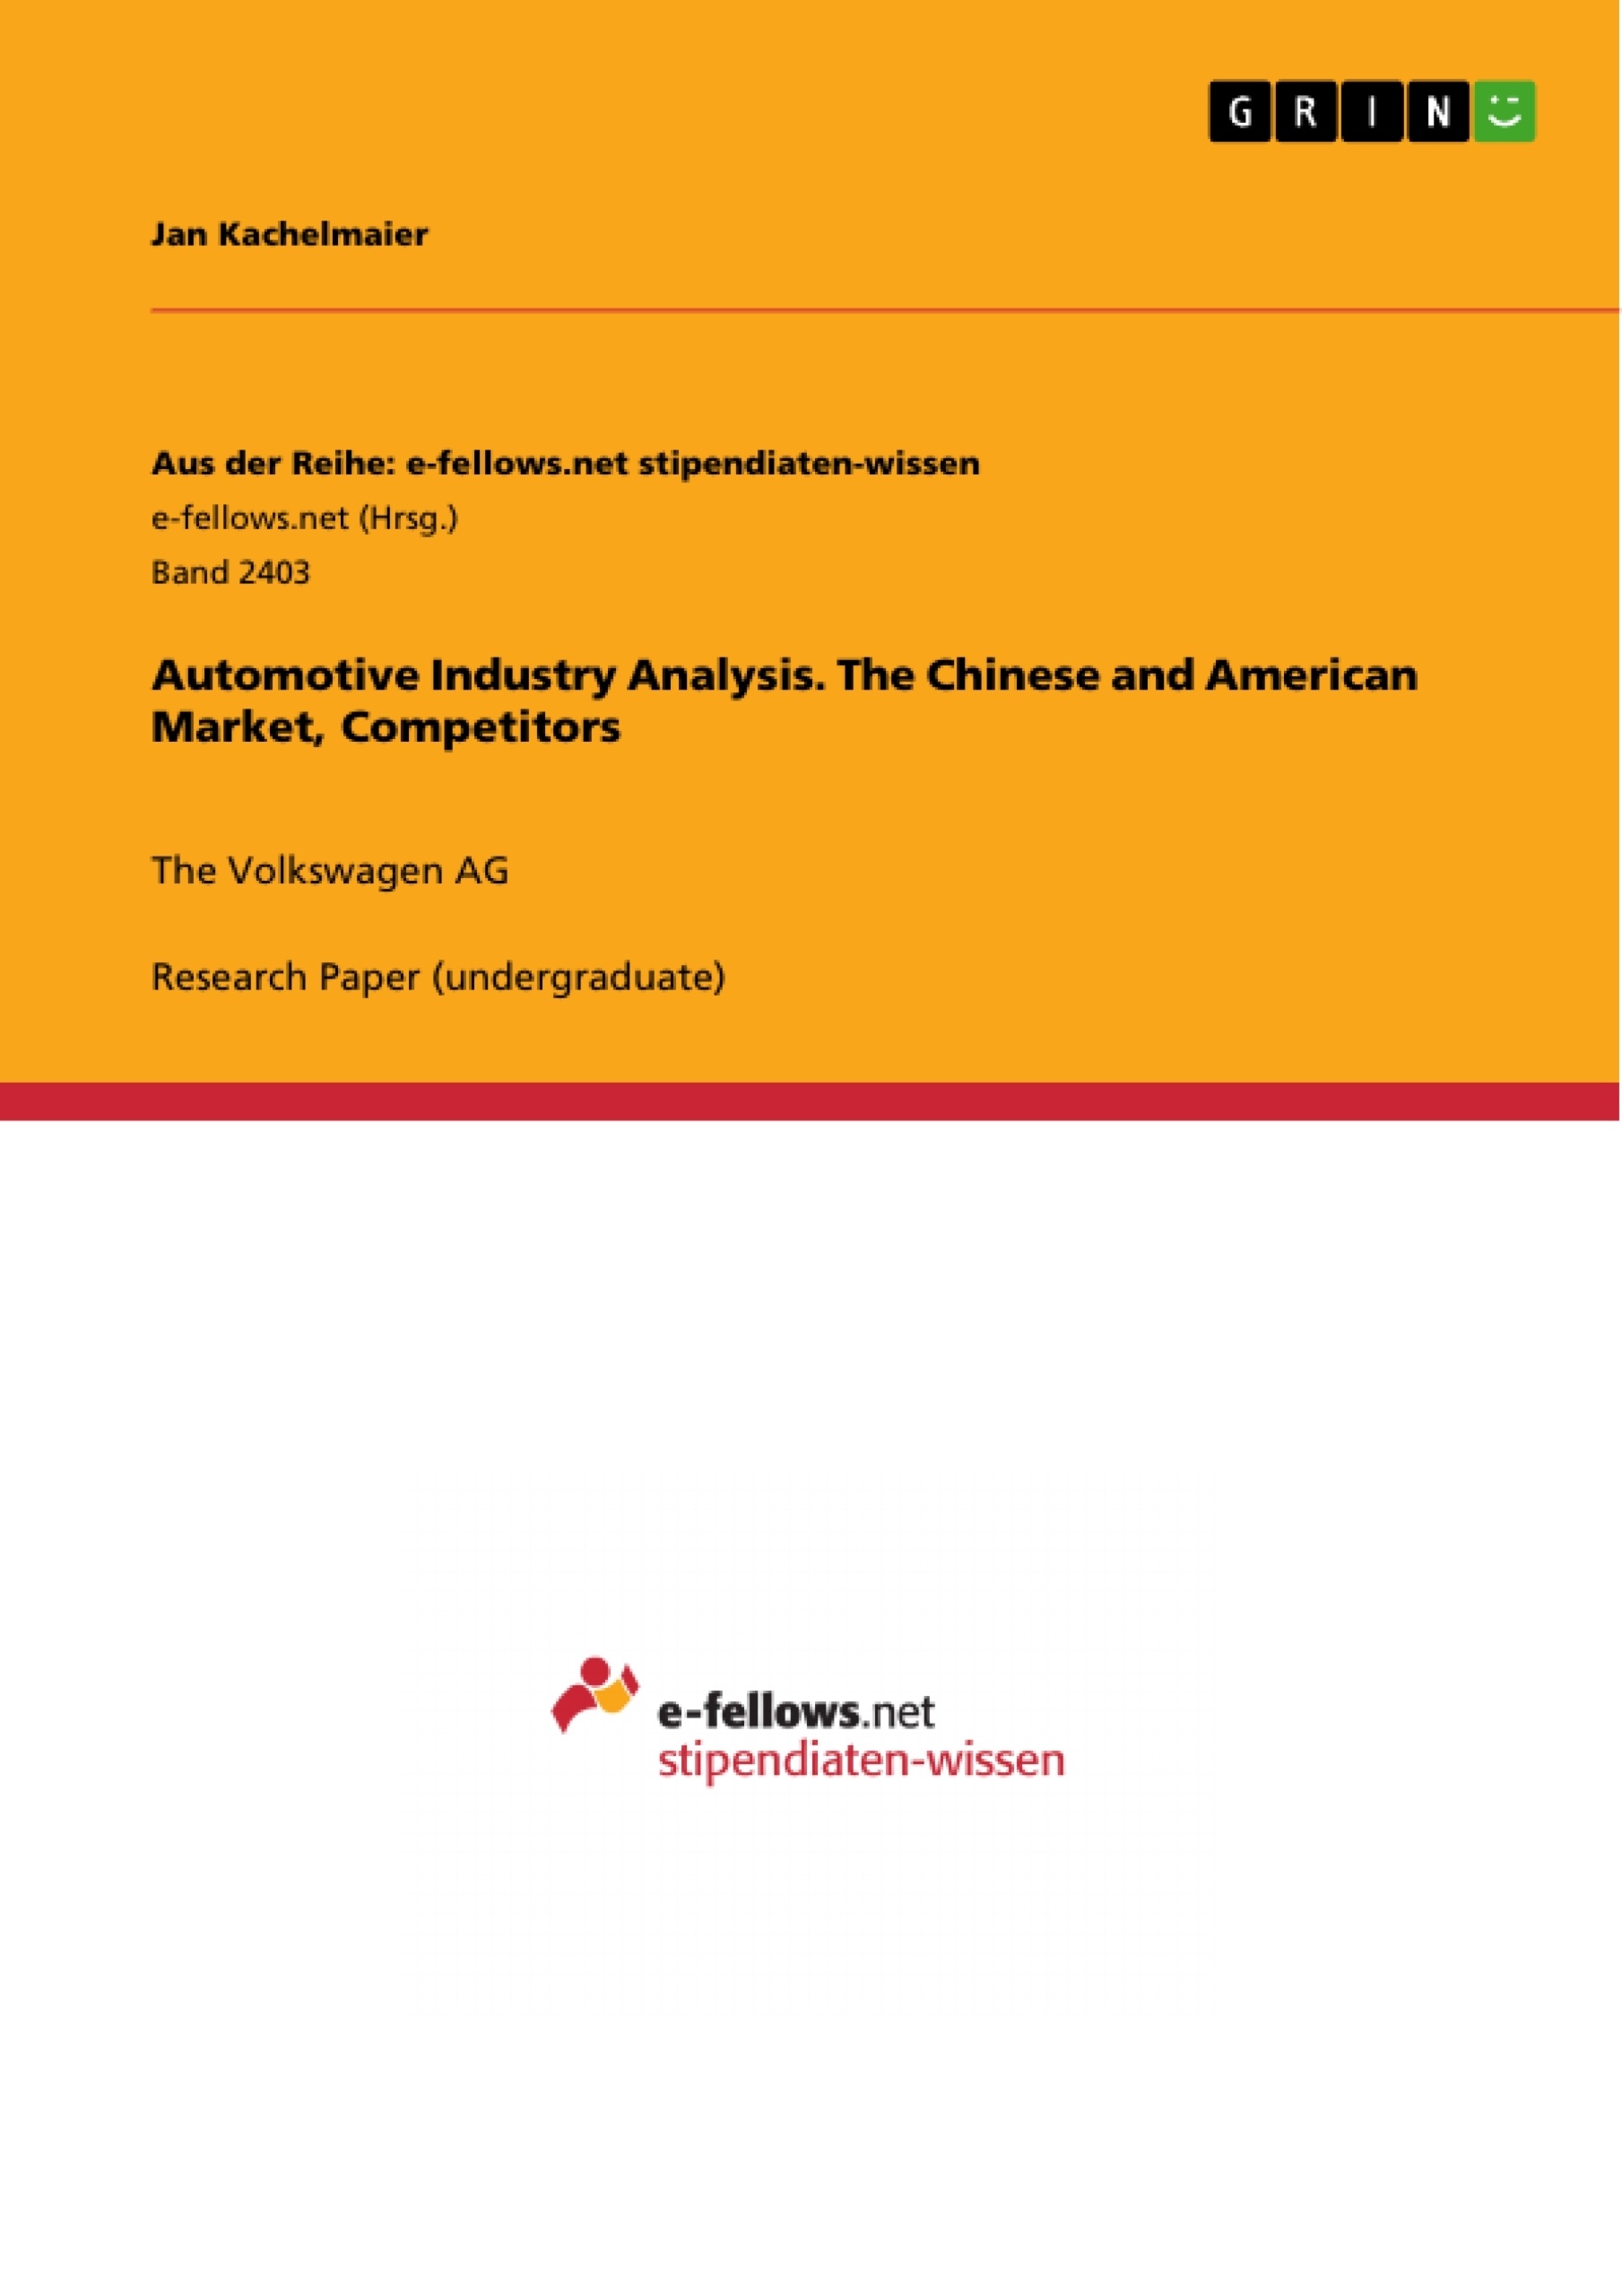 Title: Automotive Industry Analysis. The Chinese and American Market, Competitors